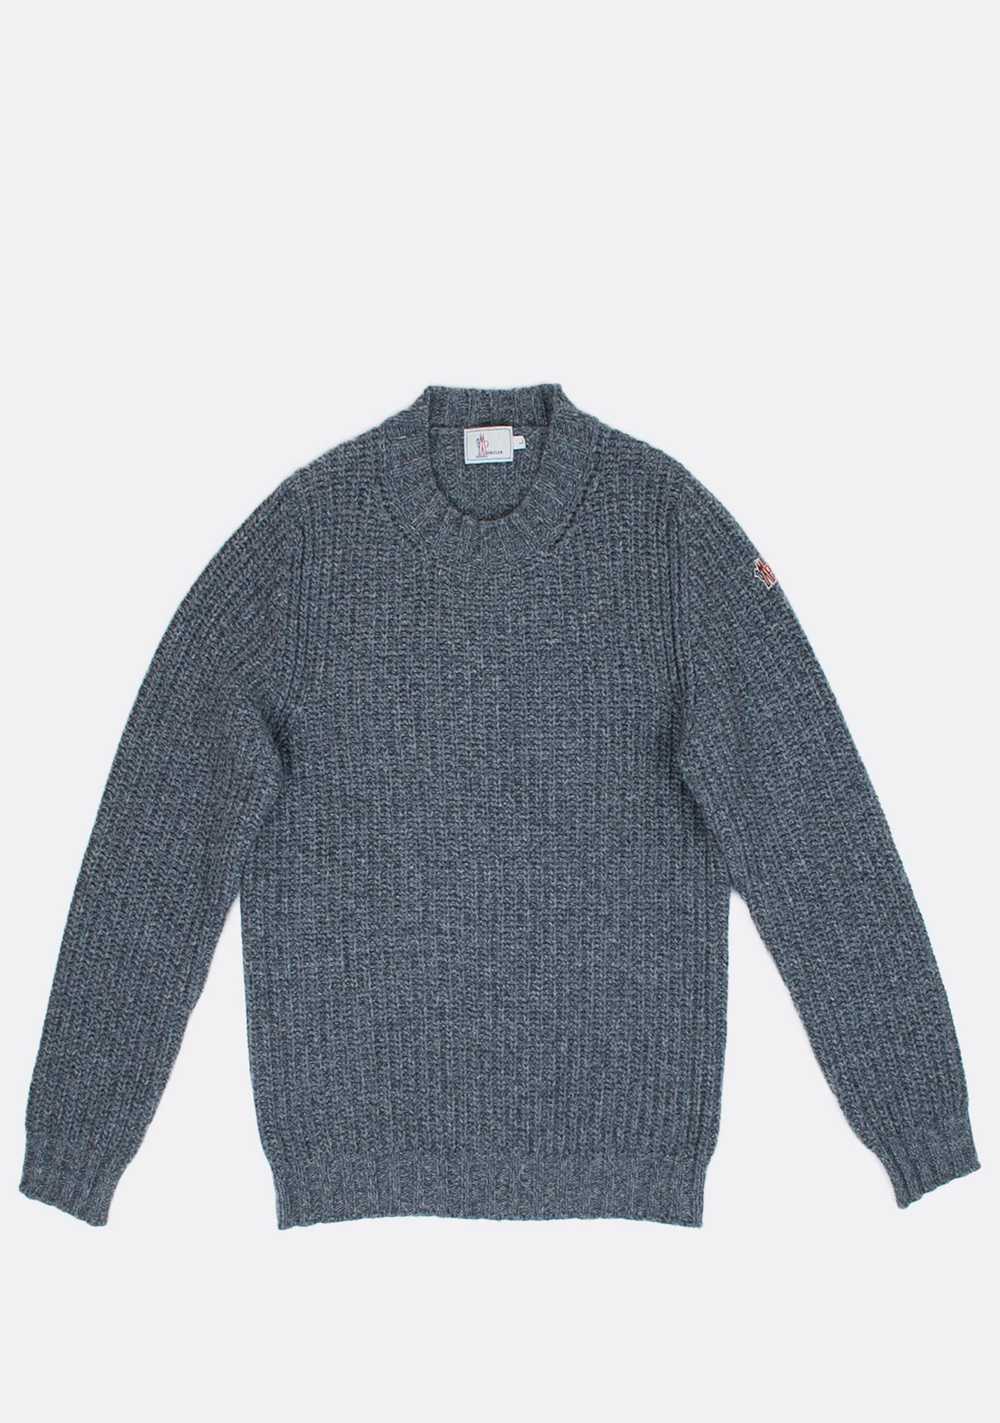 Moncler Moncler Maglione Tricot Girocollo Wool Bl… - image 2